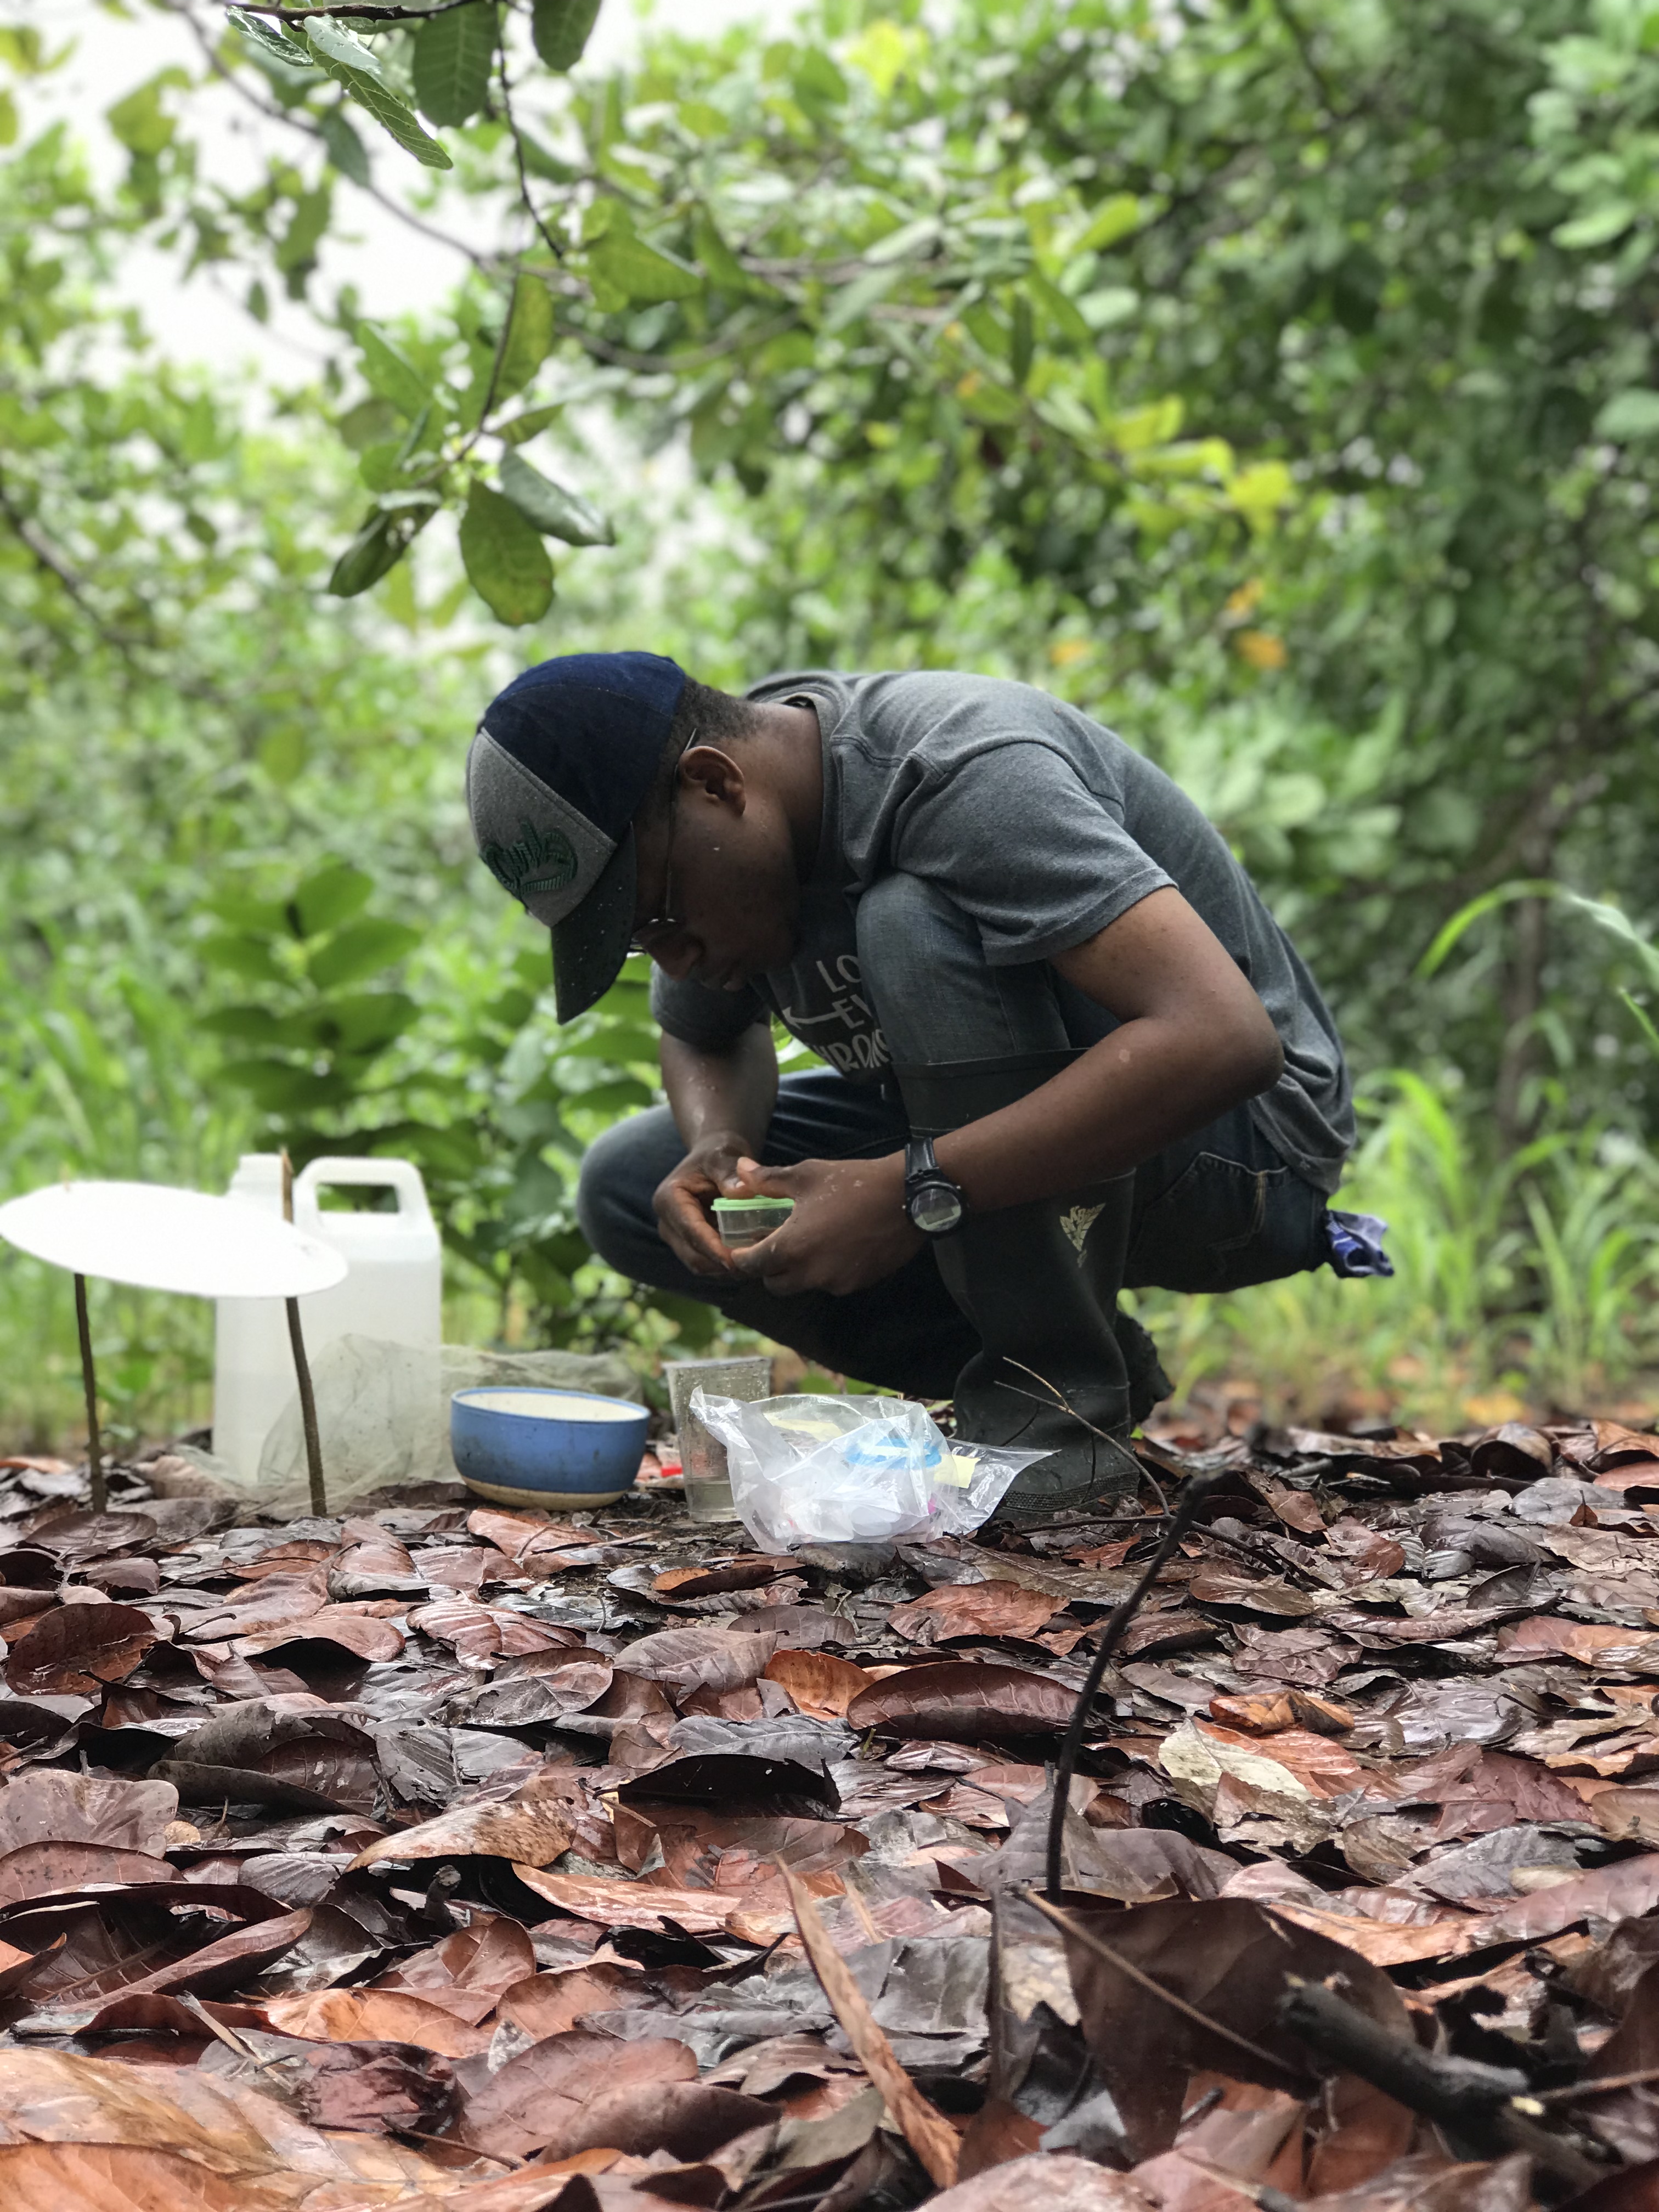 A researcher takes samples in a forest.